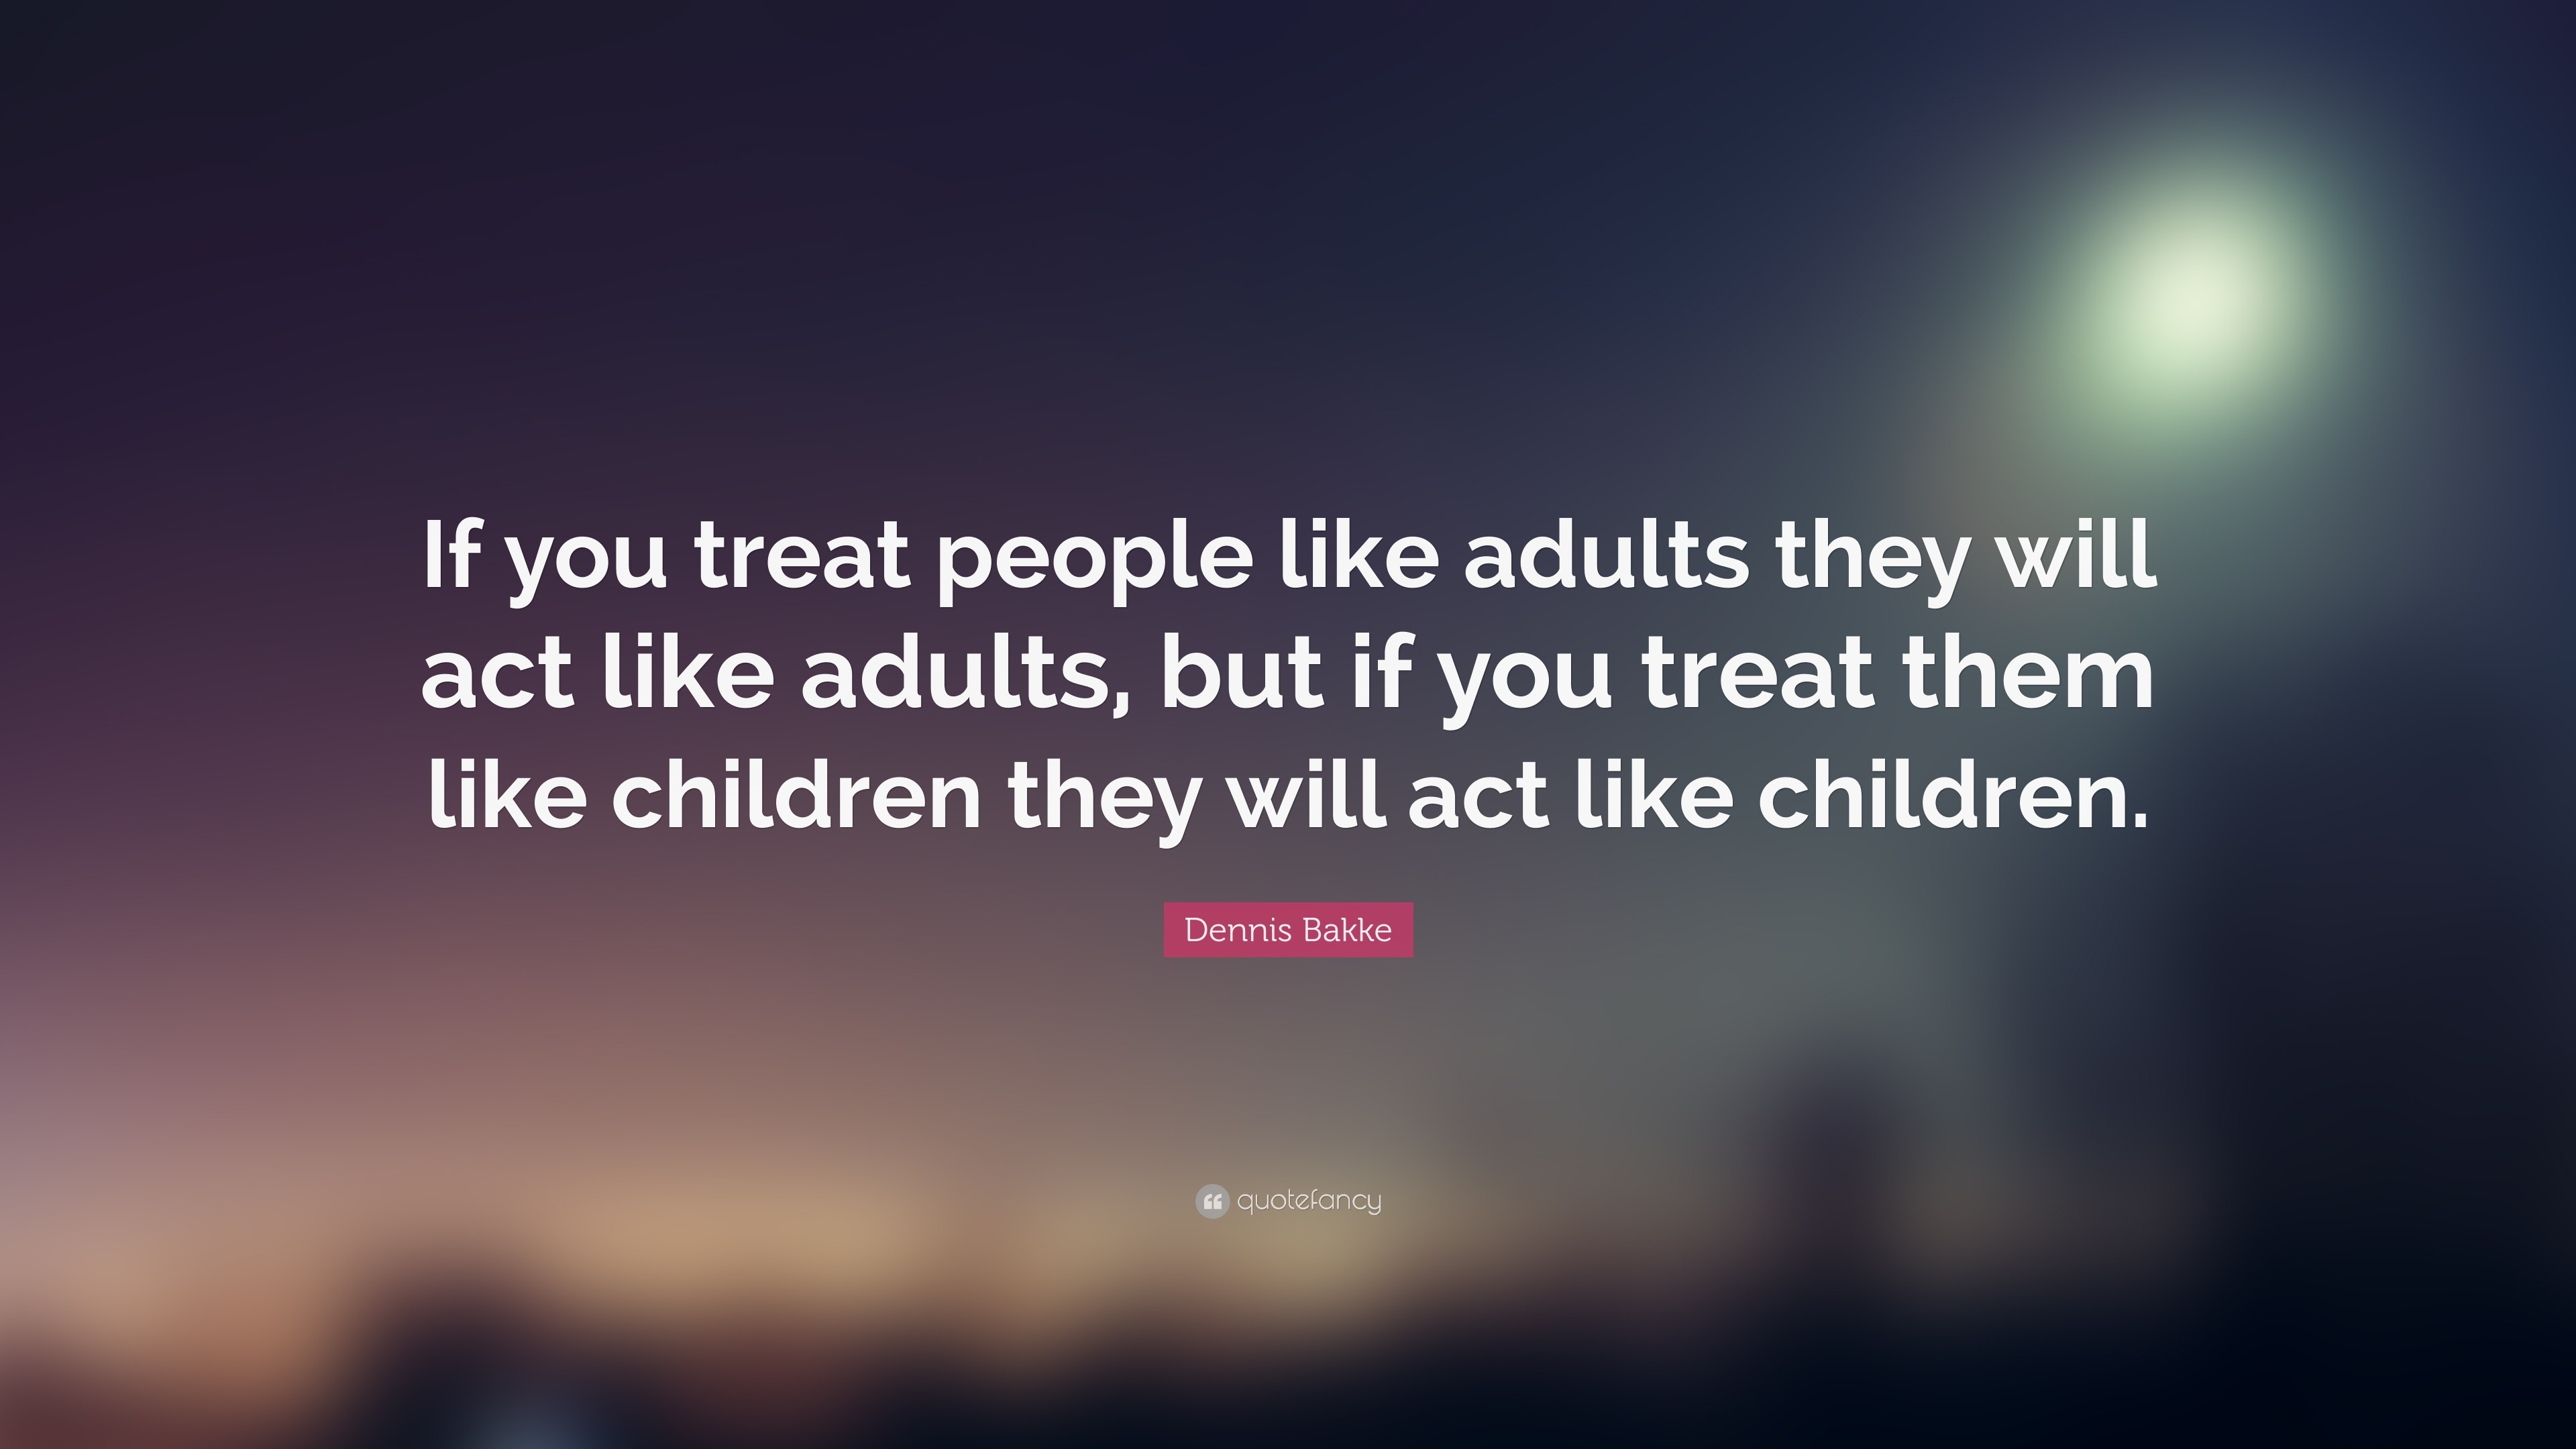 Dennis Bakke Quote: “If you treat people like adults they will act like